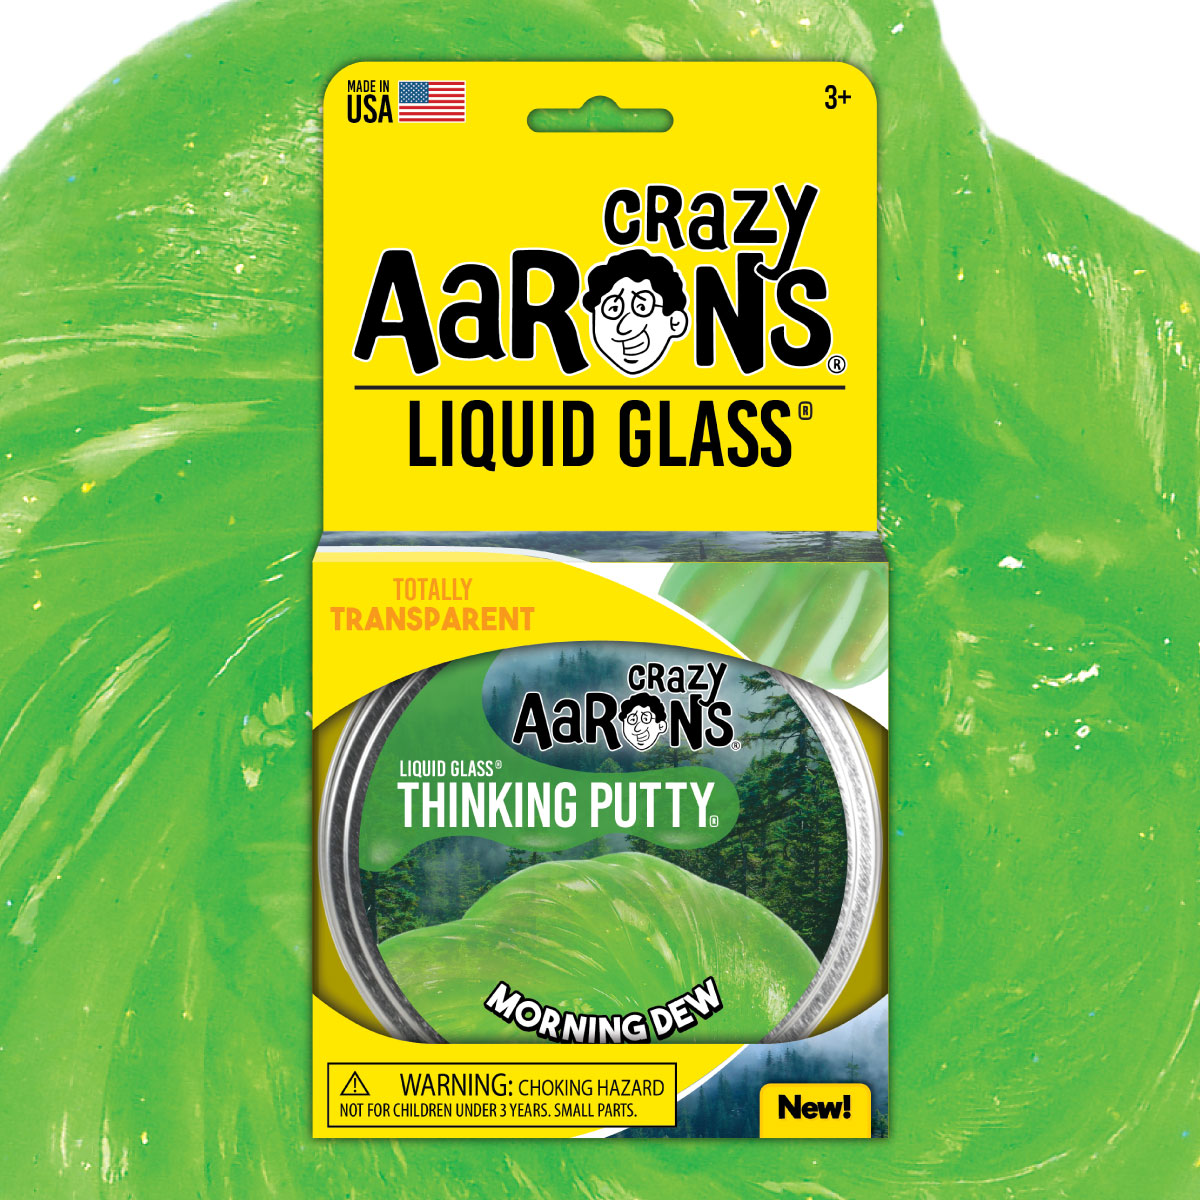 Crazy Aaron's Thinking Putty Liquid Glass Morning Dew